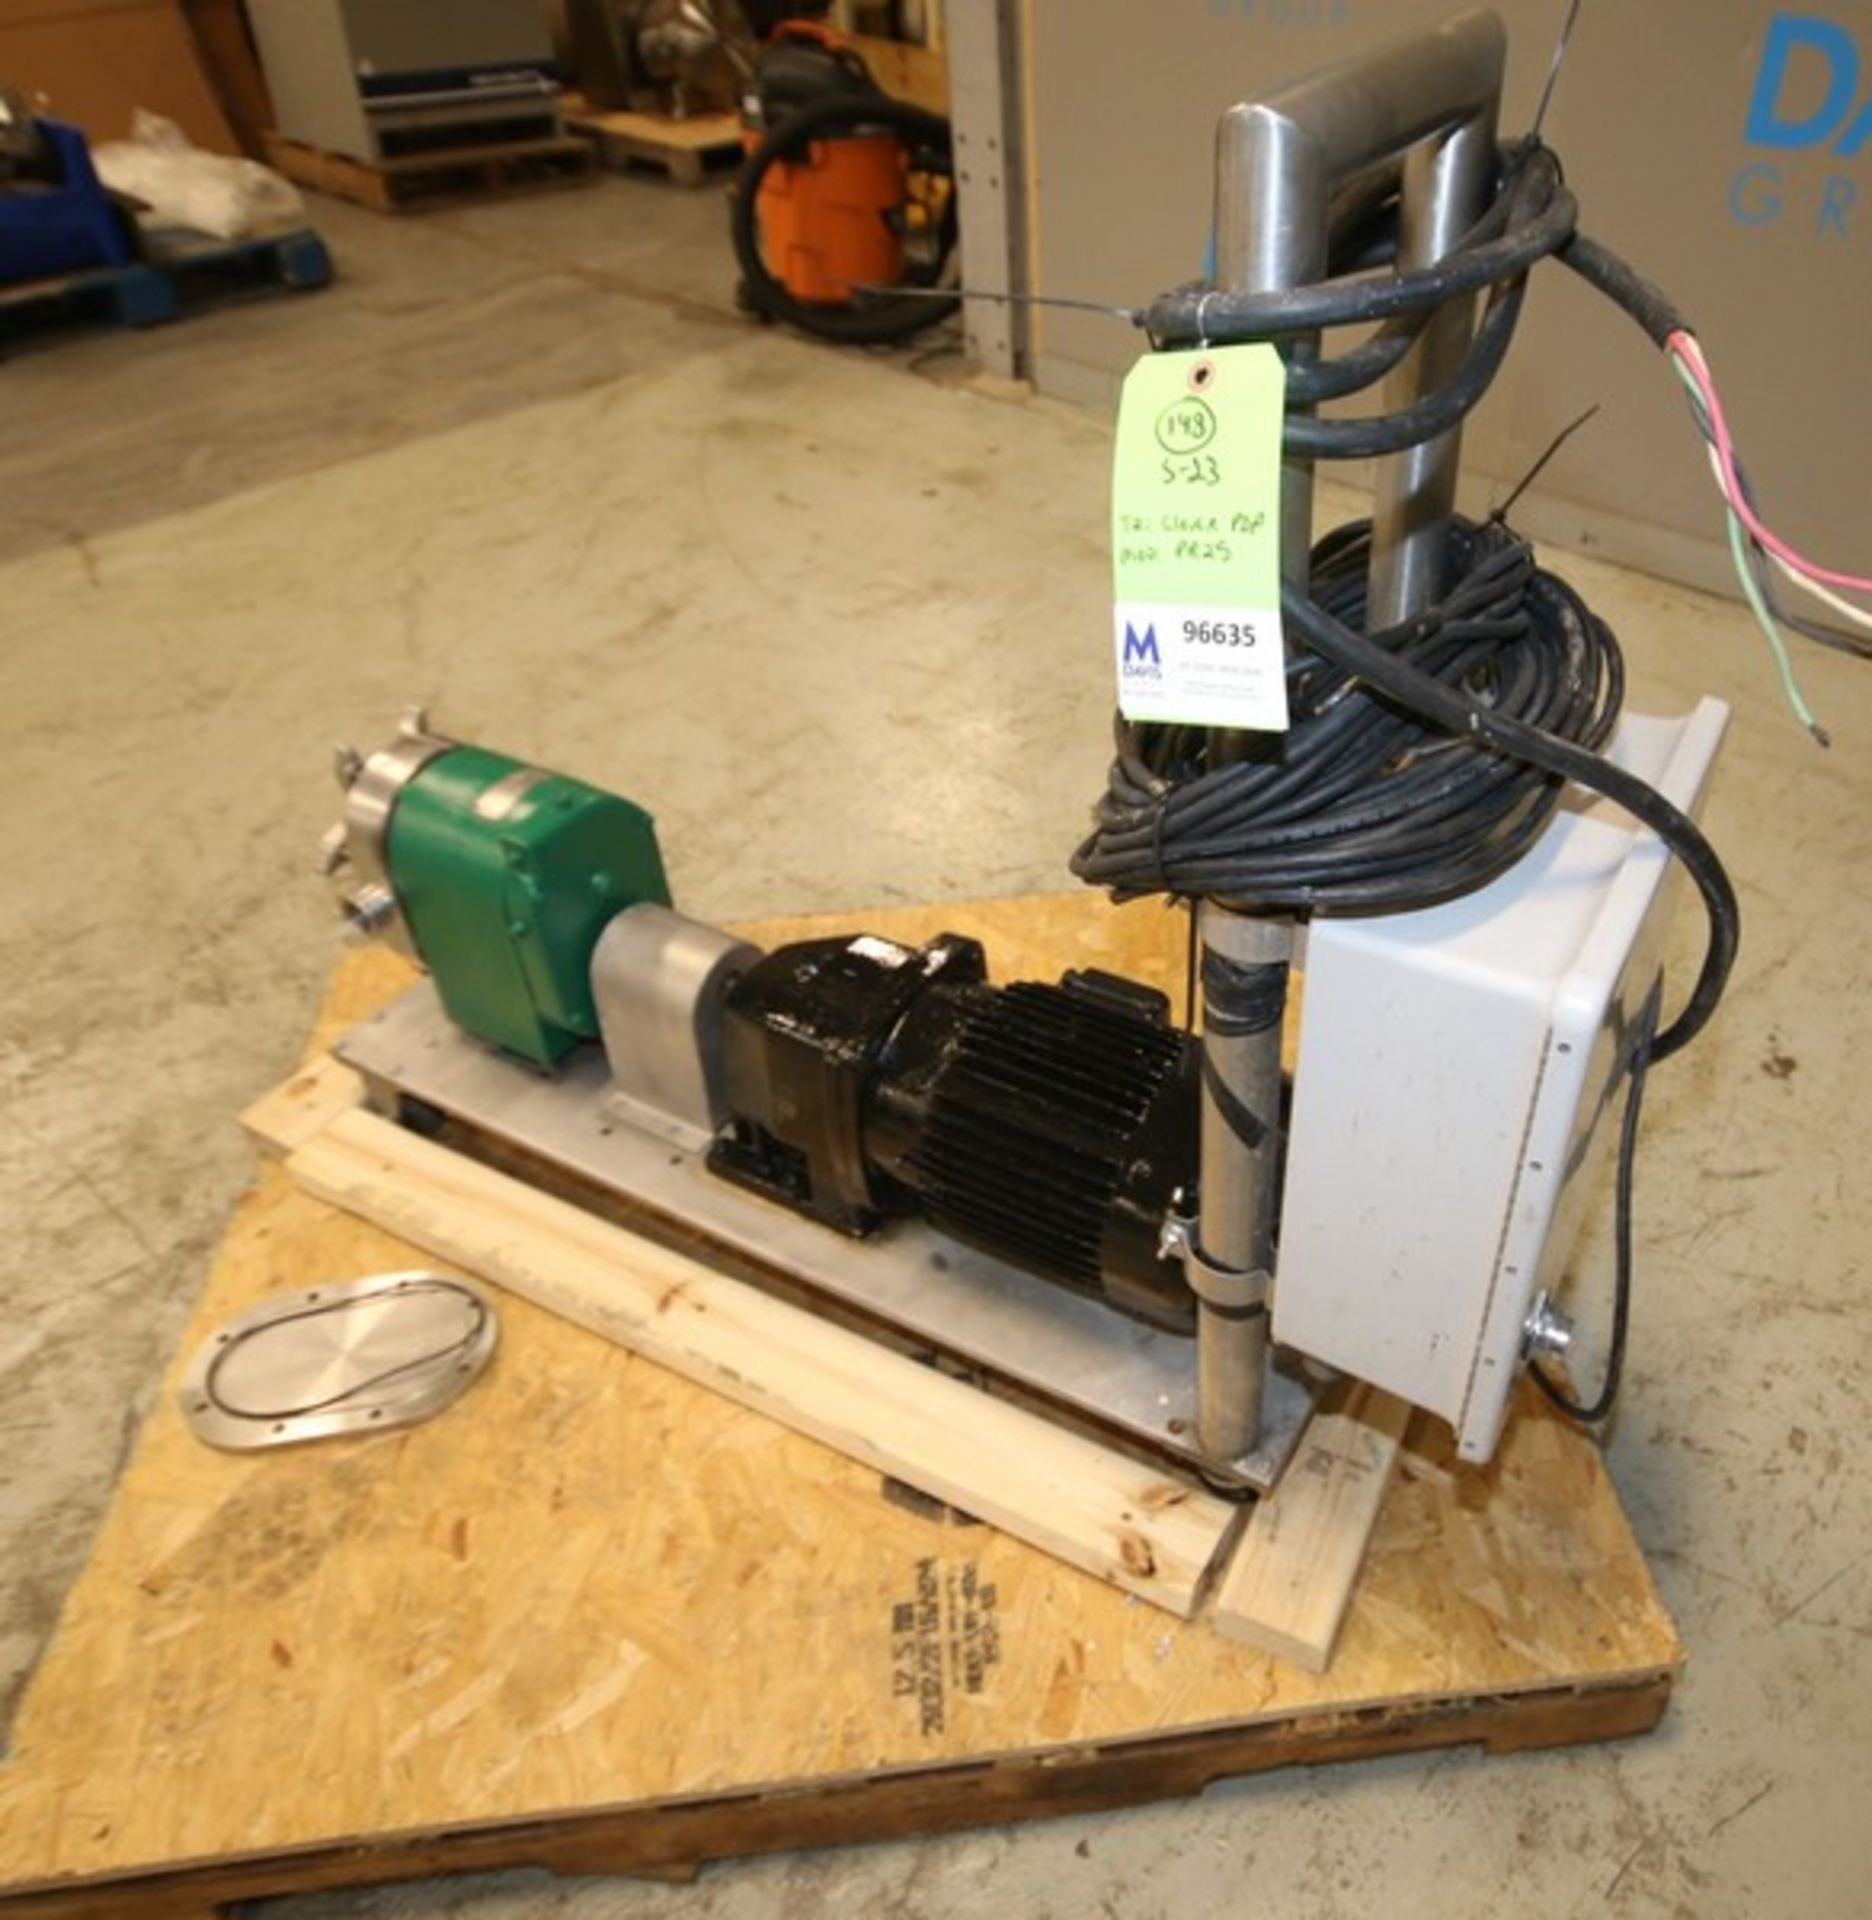 Tri Clover Positive Displacement Pump, Model PR25-1 1/2 - MUC4-SL-S, SN Y1534, with 1 1/2" CT S/S - Image 7 of 10